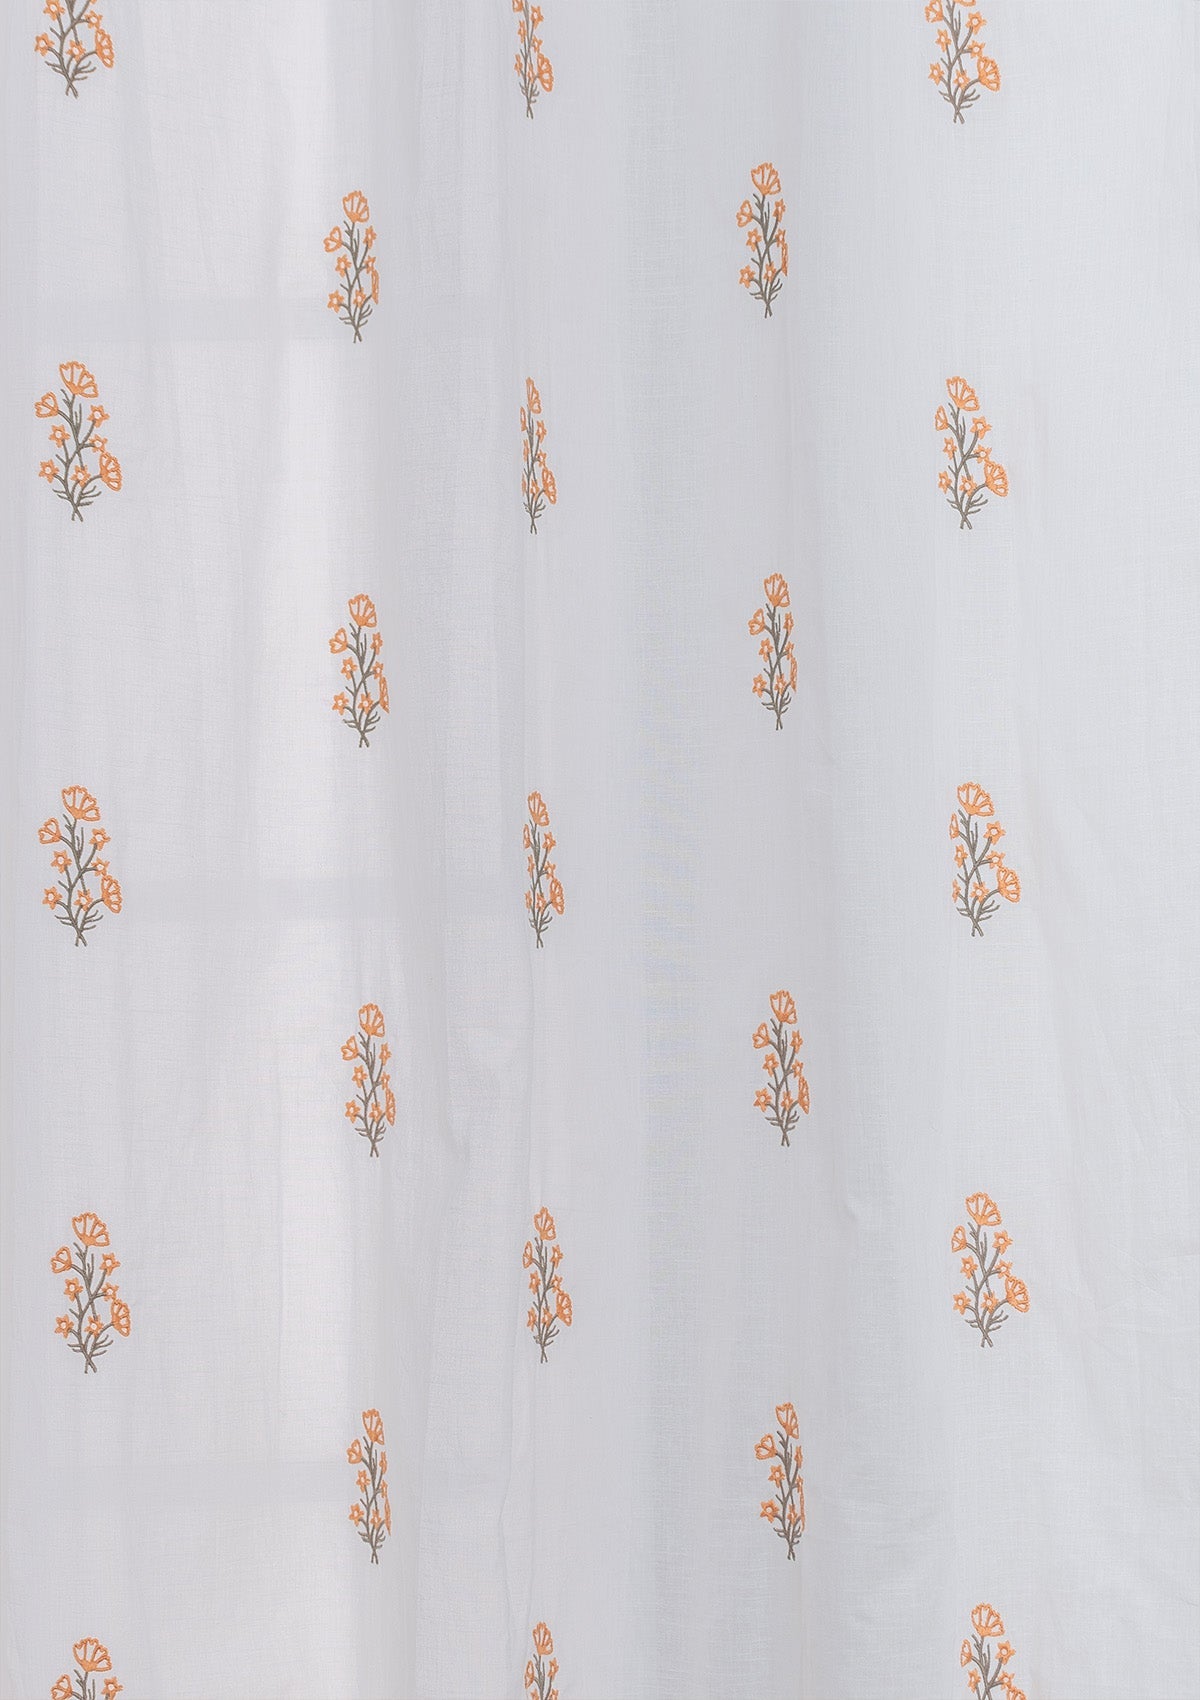 Spring 100% cotton embroidered floral sheer customisable curtain for living room - Light filtering - Orange